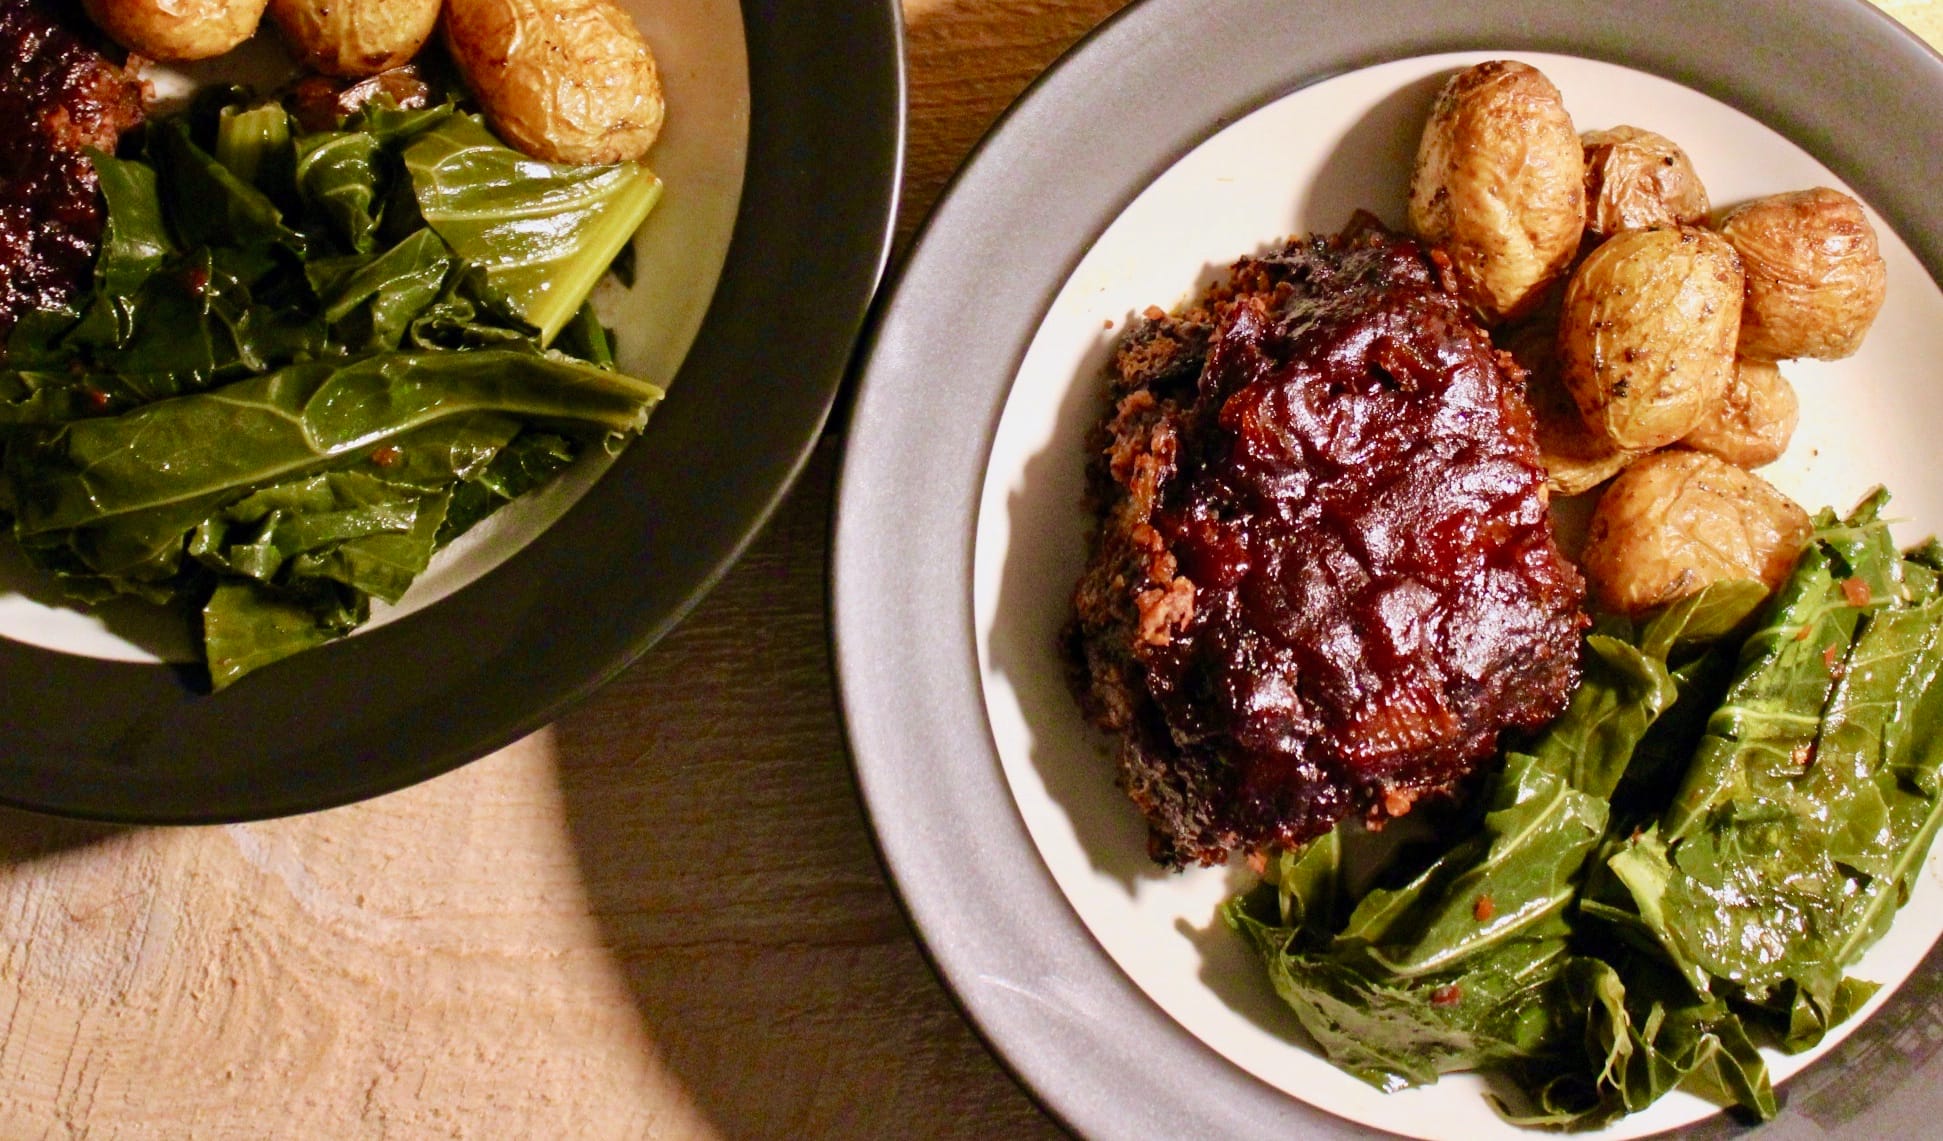 Tender vegan meatloaf with greens and roasted potatoes from Savor + Harvest (with Karl).